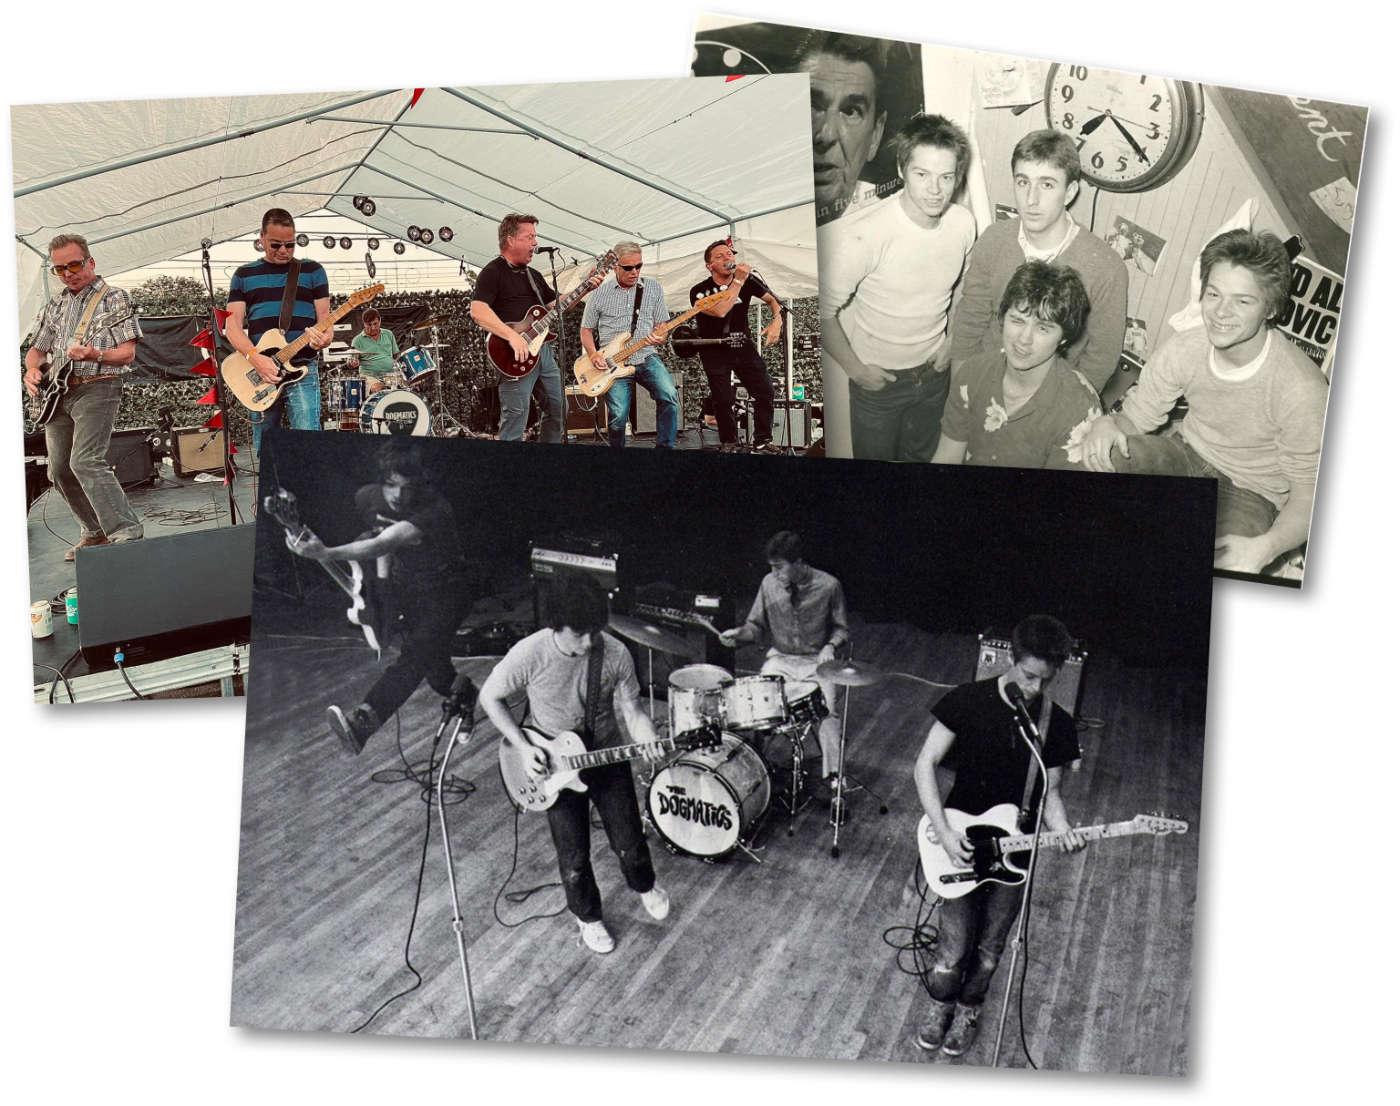 The Dogmatics - Then & Now photos